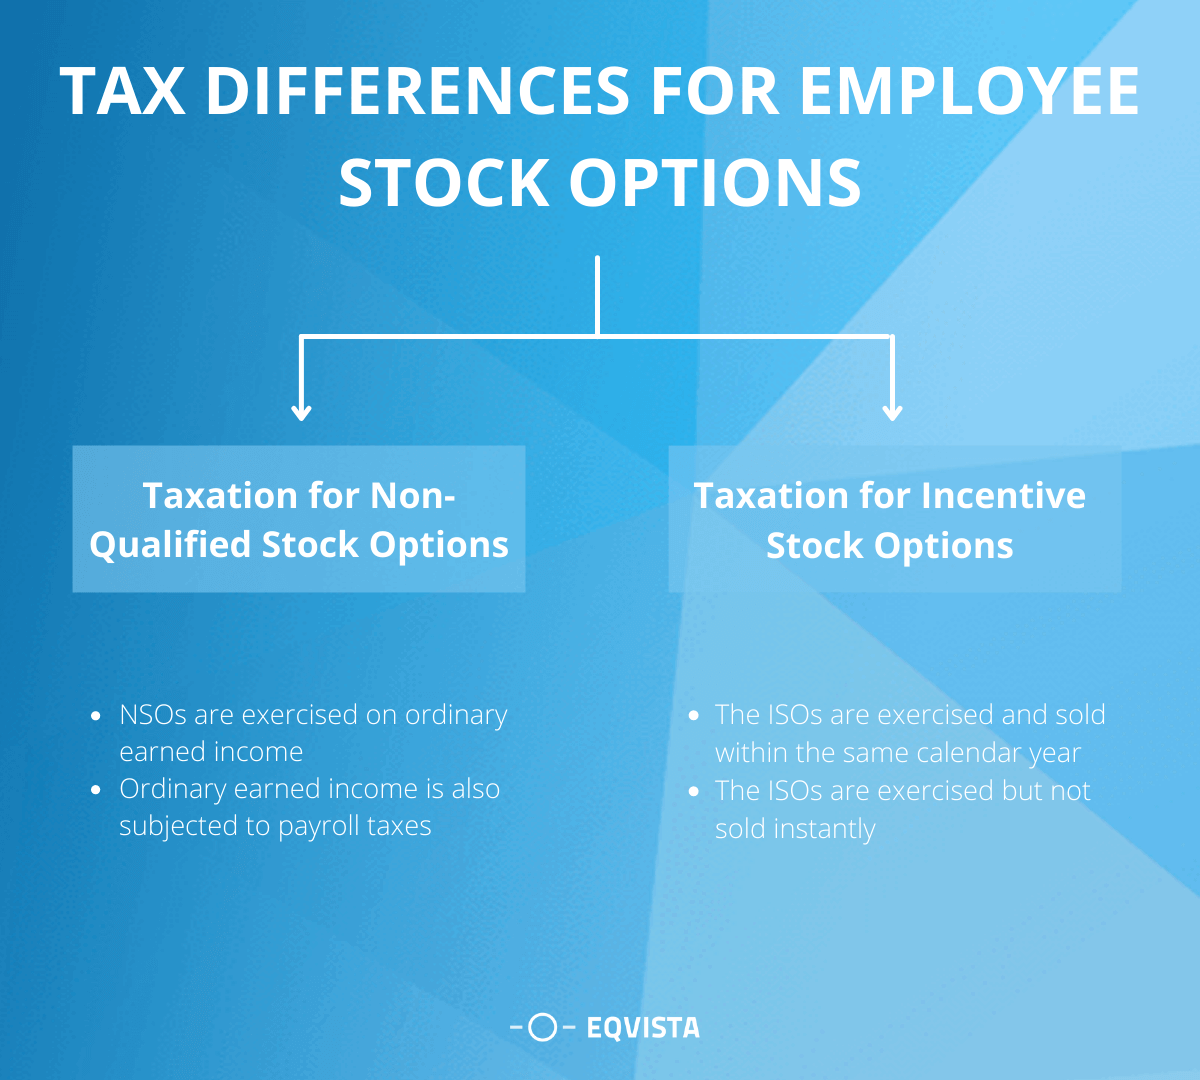 Tax differences for employee stock options